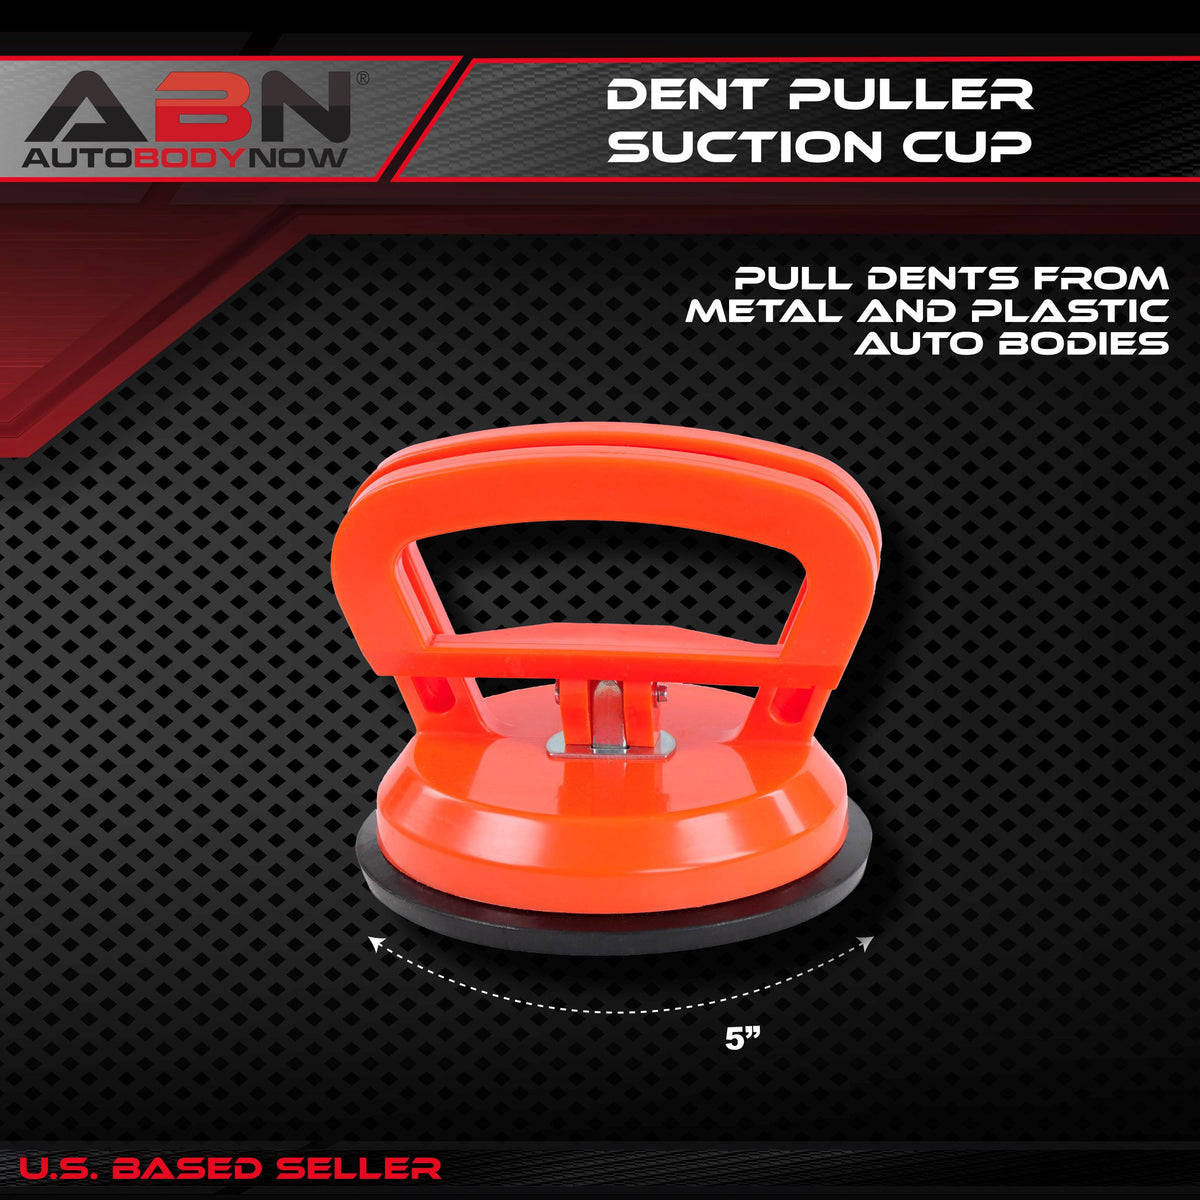 Dent Puller Suction Cup, 5” Inch – for Pulling Large Car Hail Damage